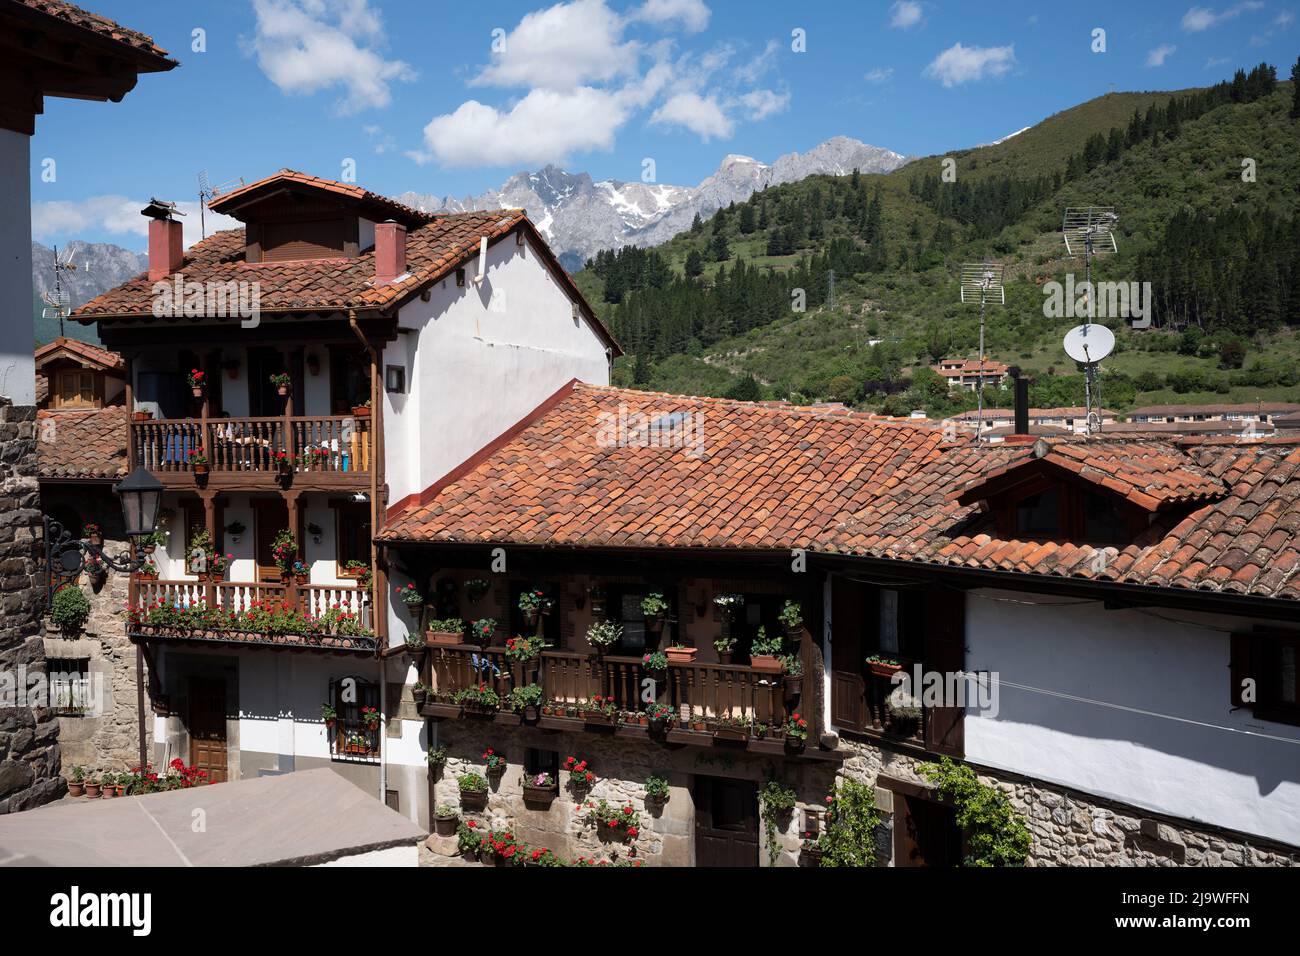 With magnificent views of mountain peaks in the distance, we see heritage houses and properties in Potes, a popular tourist gateway for those entering the Spanish Picos de Europa National Park region, on 17th May 2022, Asturias, Spain. Stock Photo